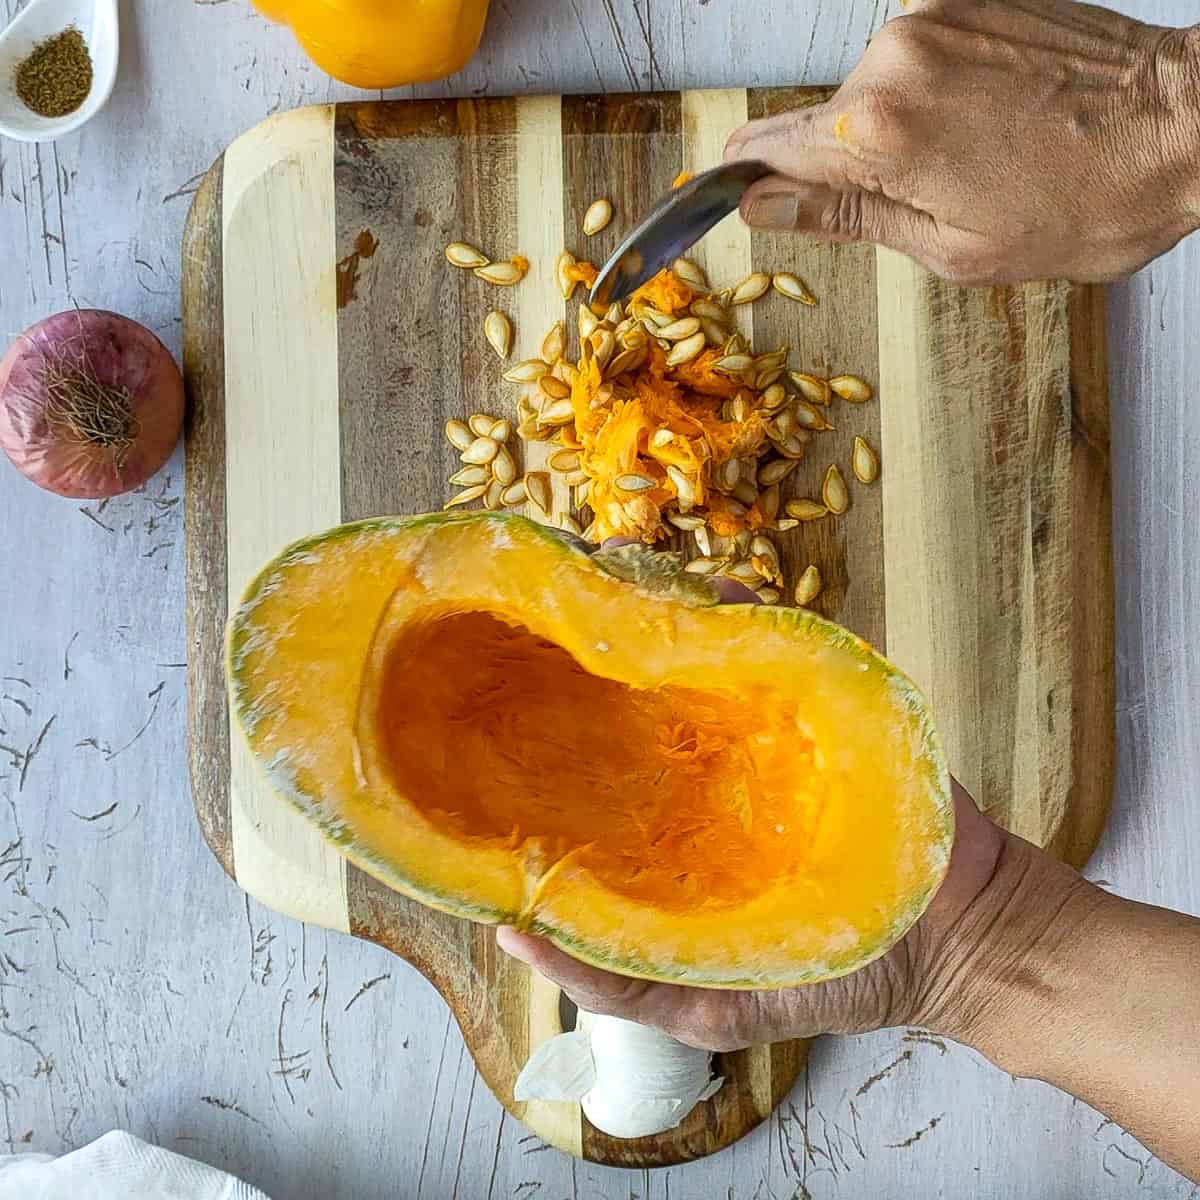 Removing seeds from pumpkin before roasting.